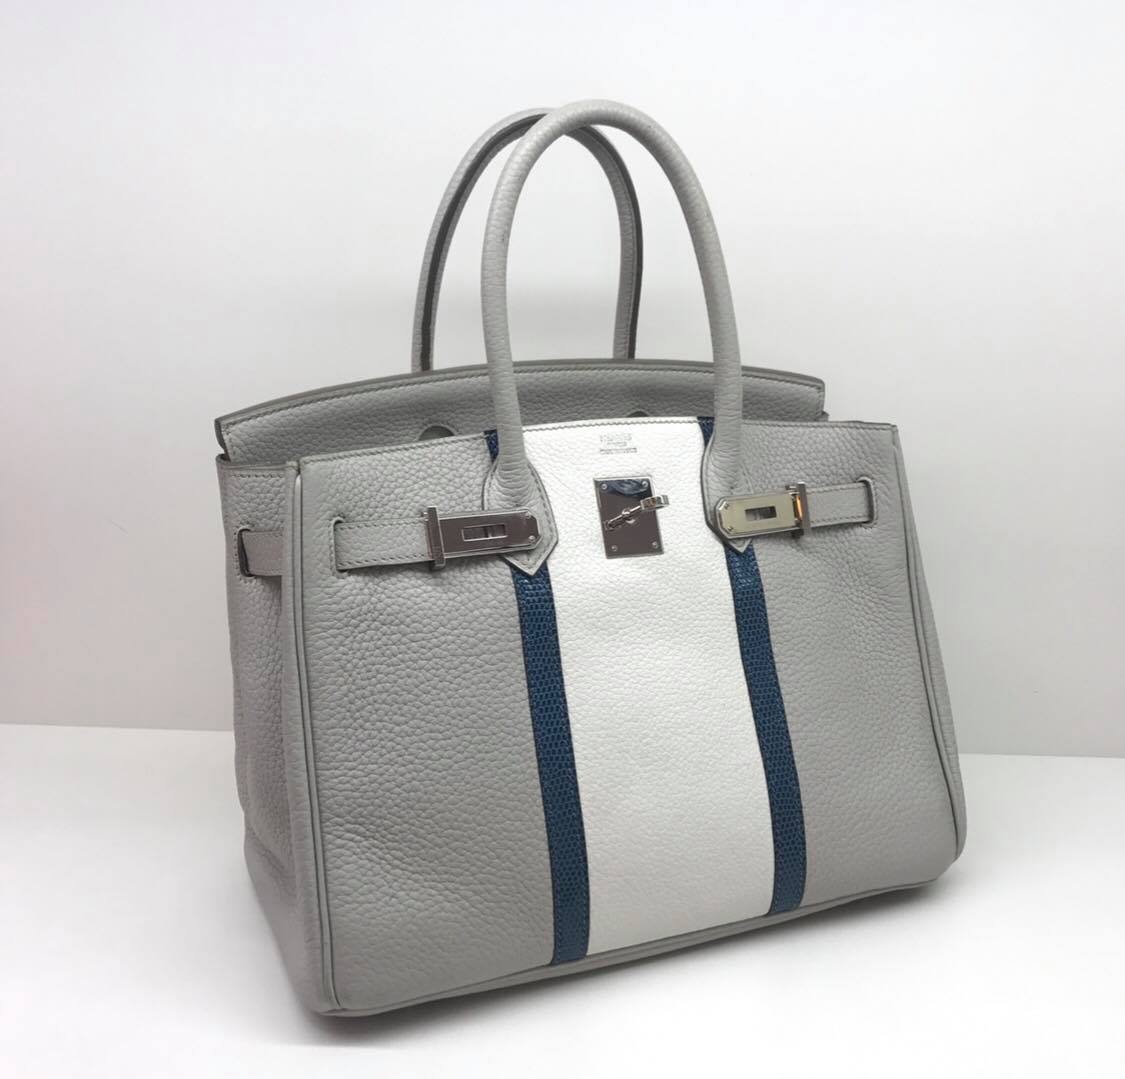 Hermes Birkin 30 in Gris Pale with Perle and Mykonos Blue Stripes ...